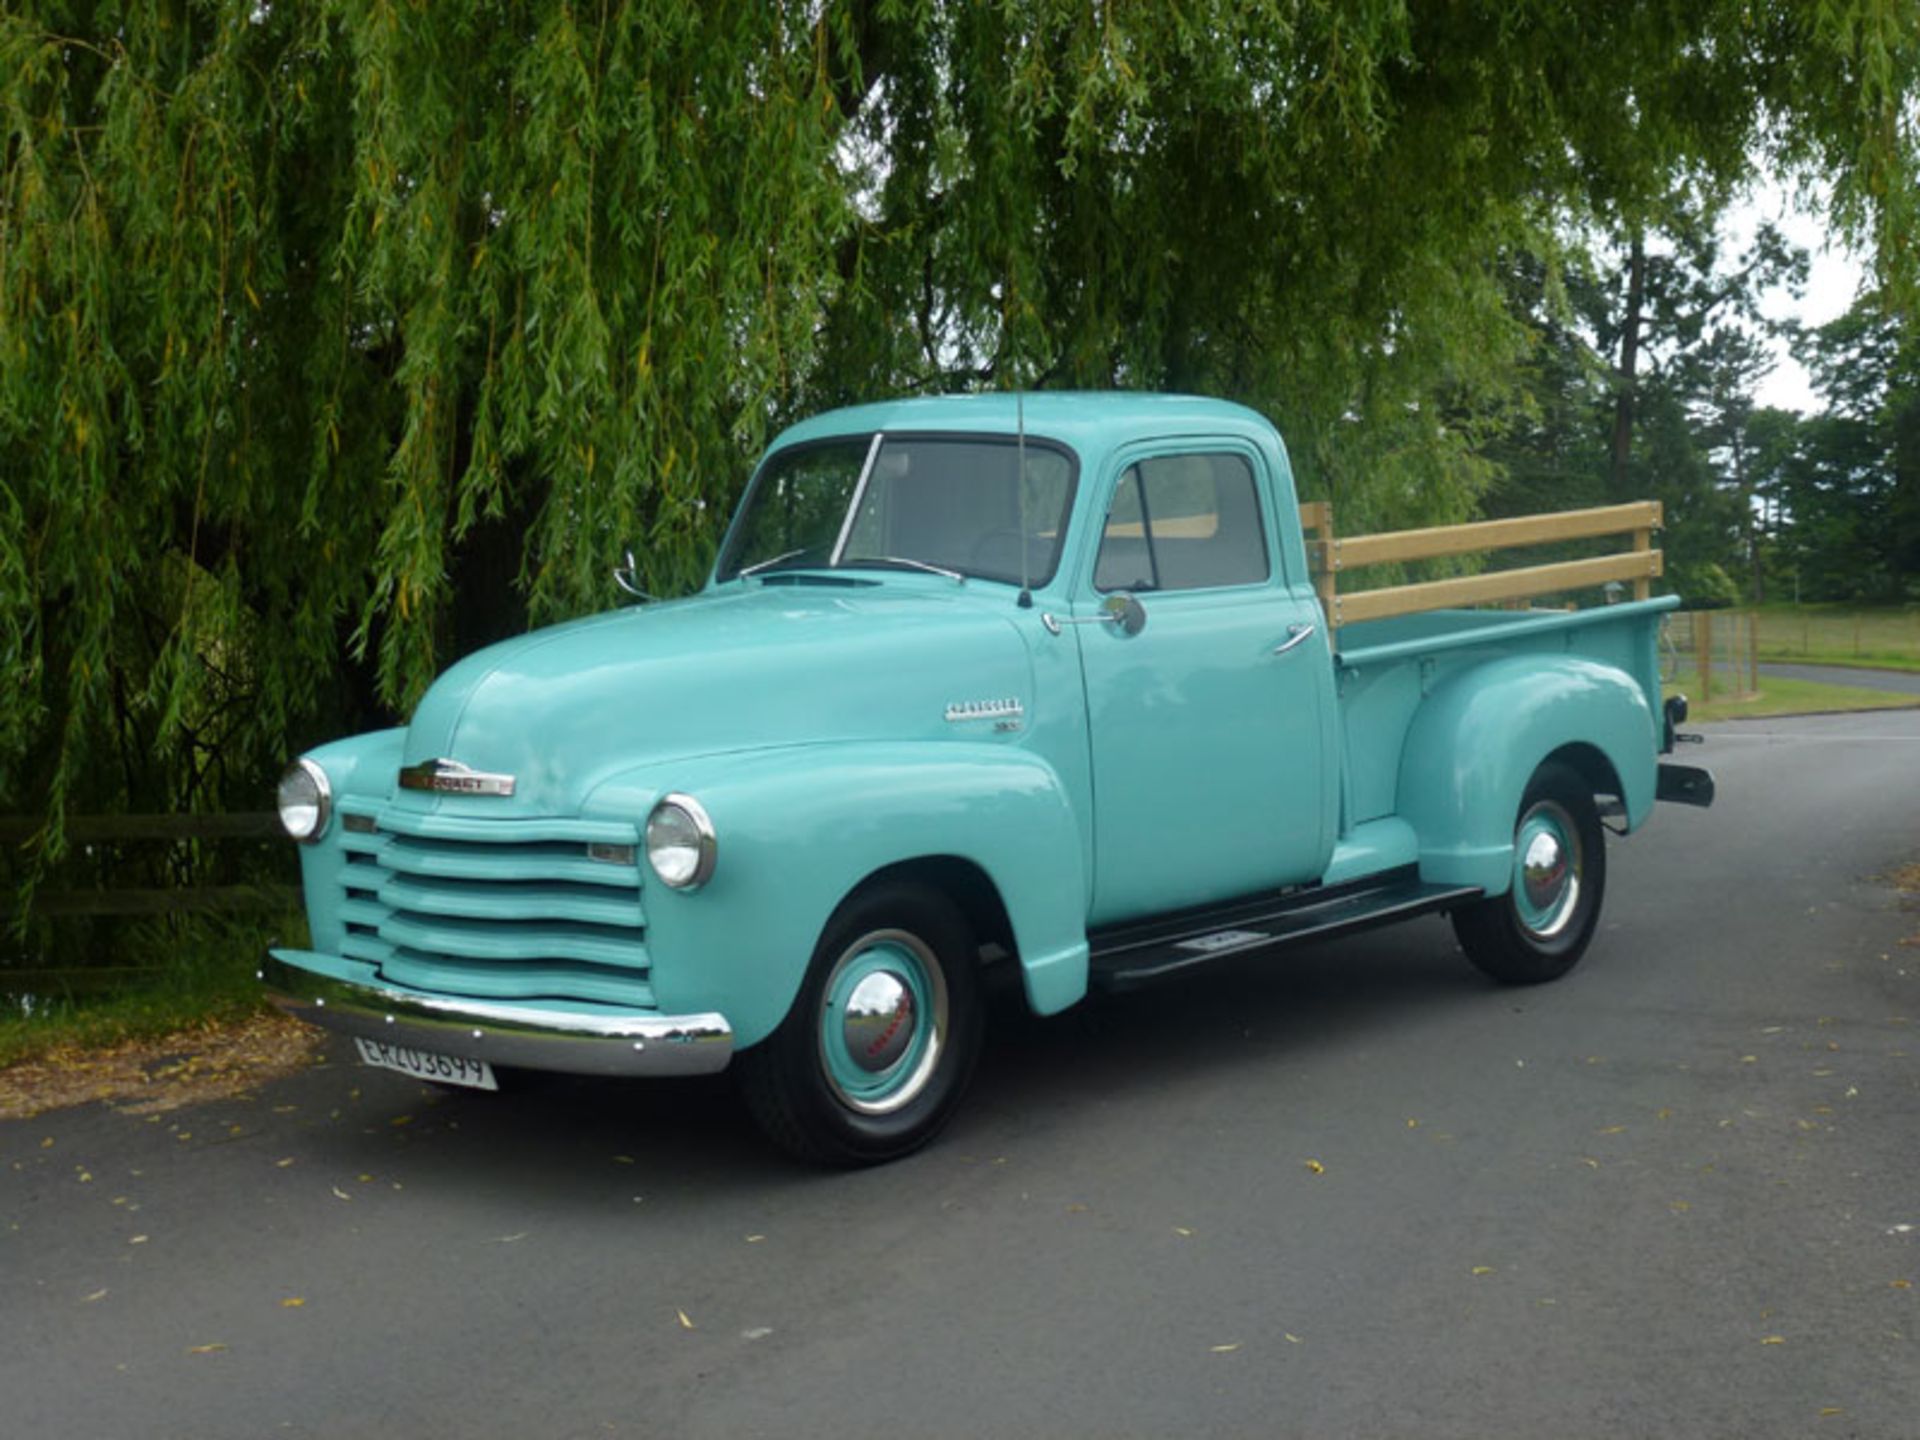 - Finished in a notably eye-catching pale pastel shade of Turquoise 

- Pickup bed features wooden